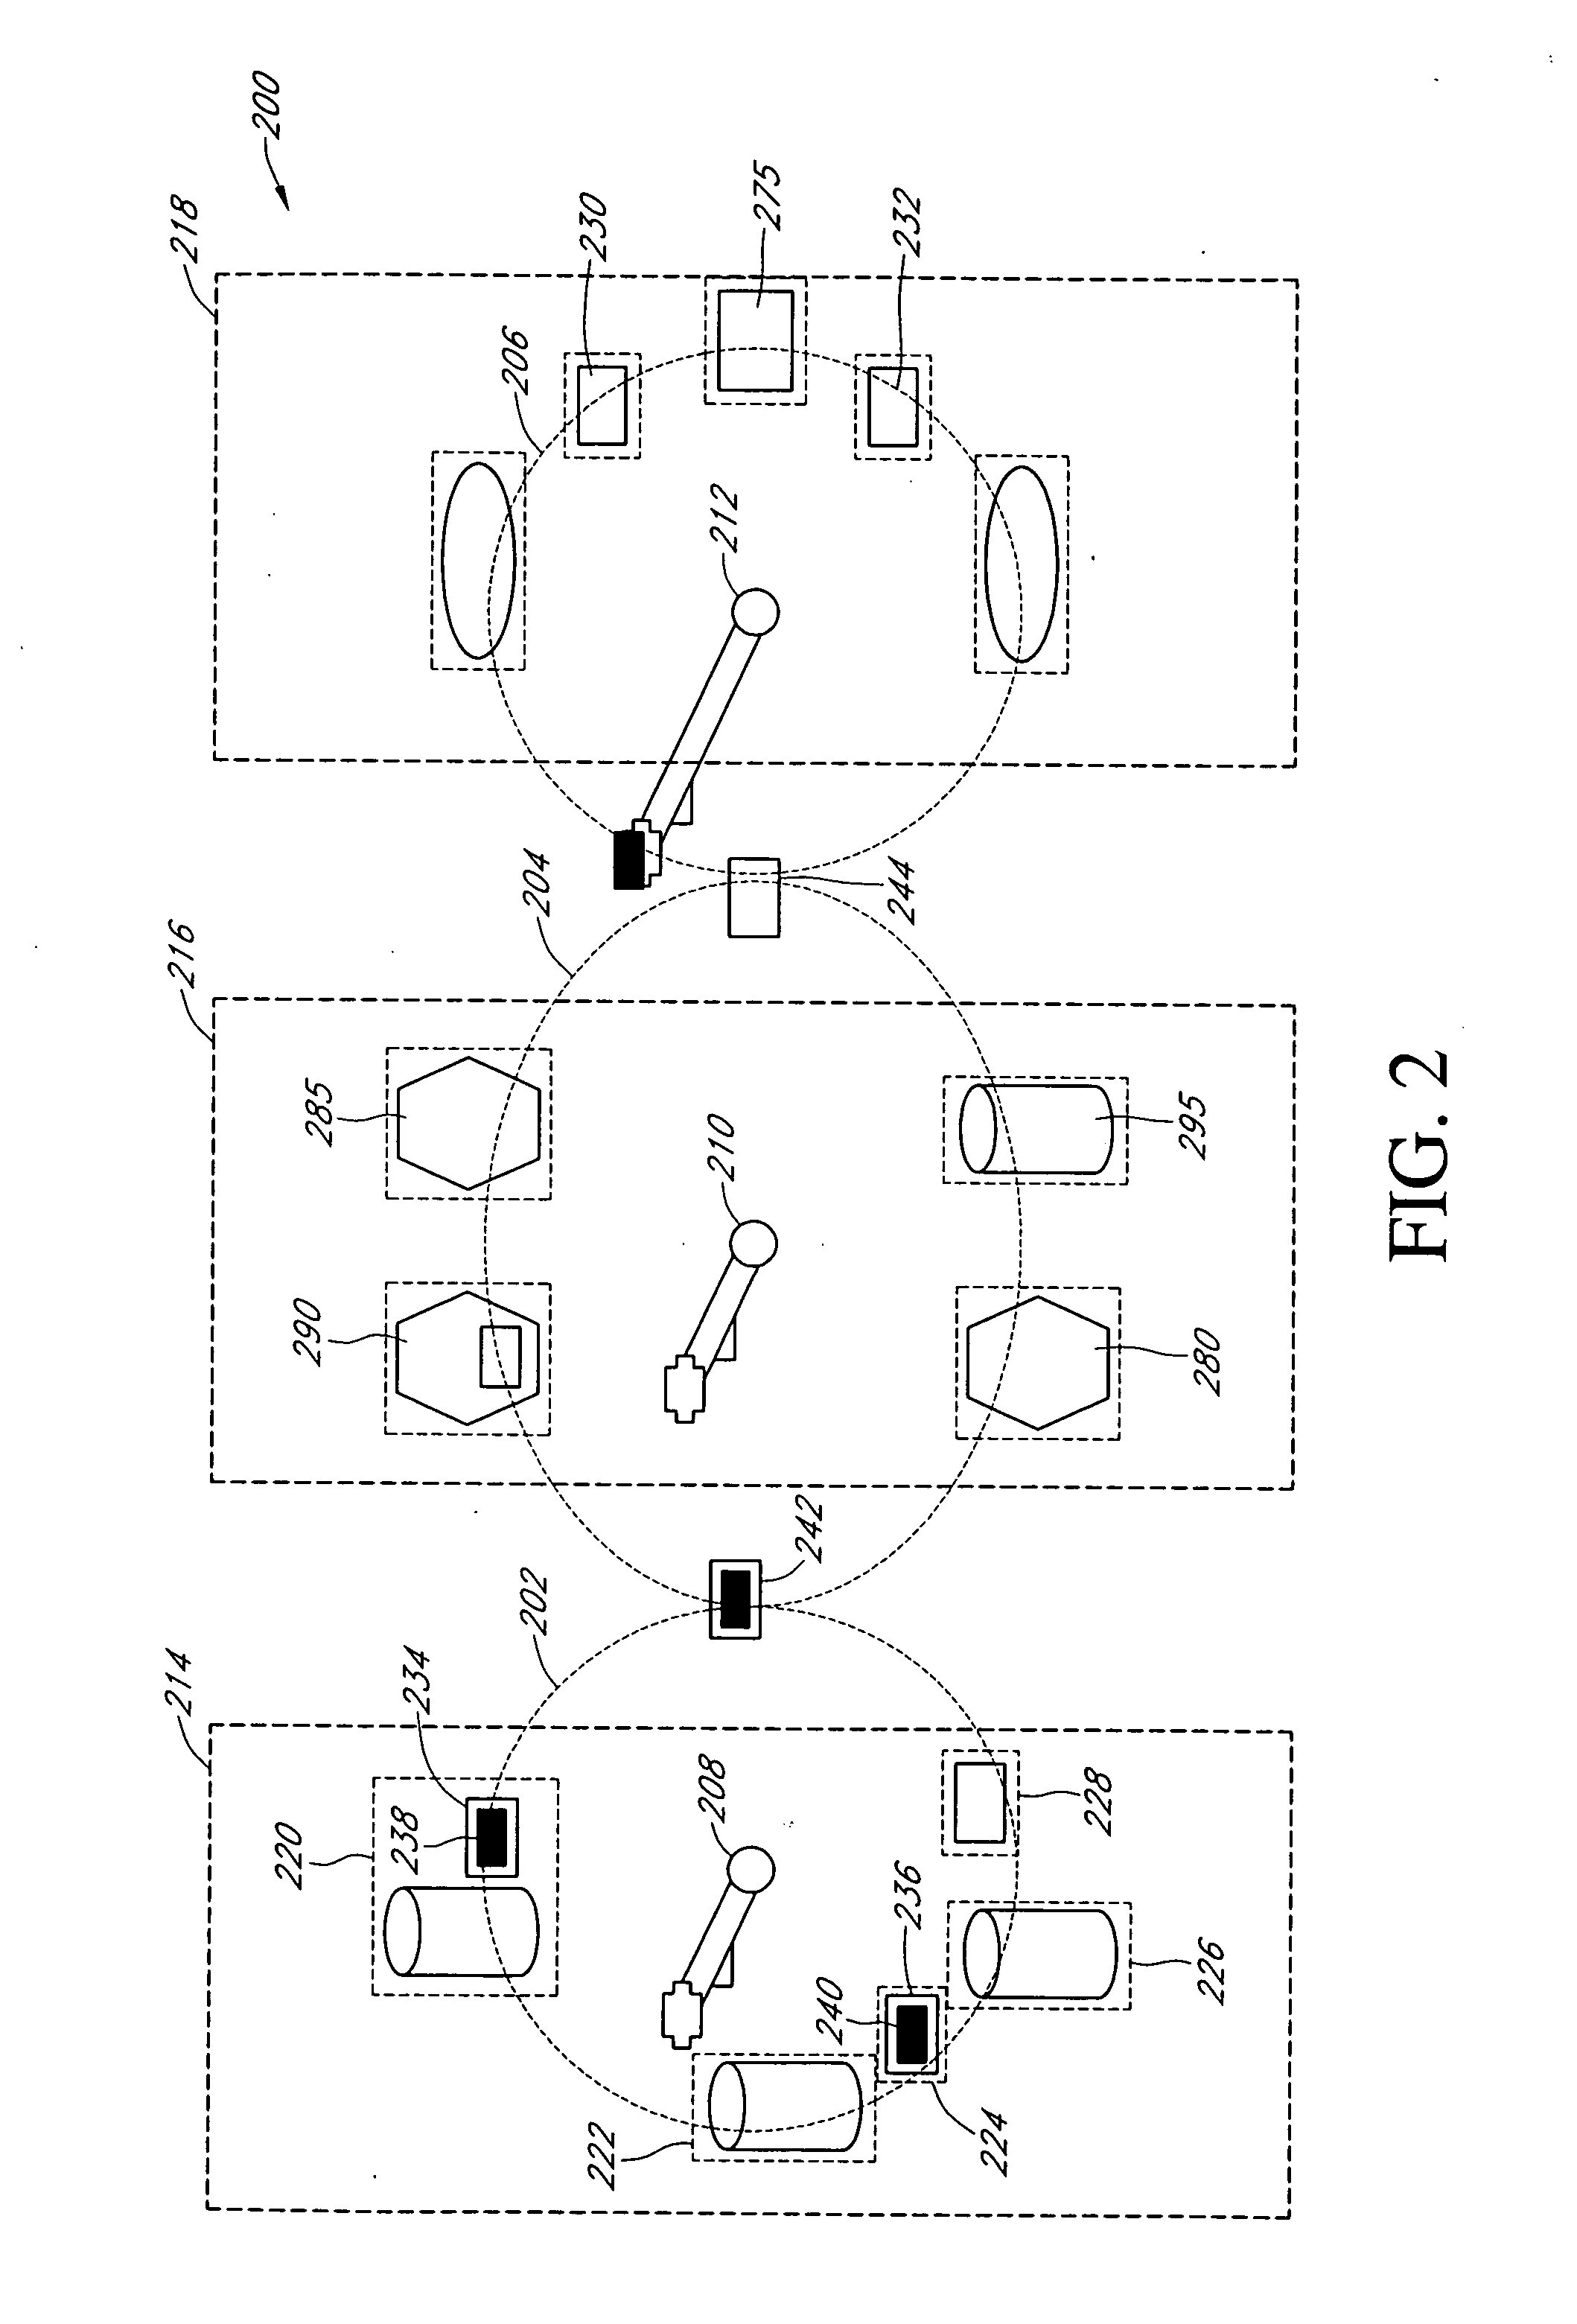 Compound profiling devices, systems, and related methods